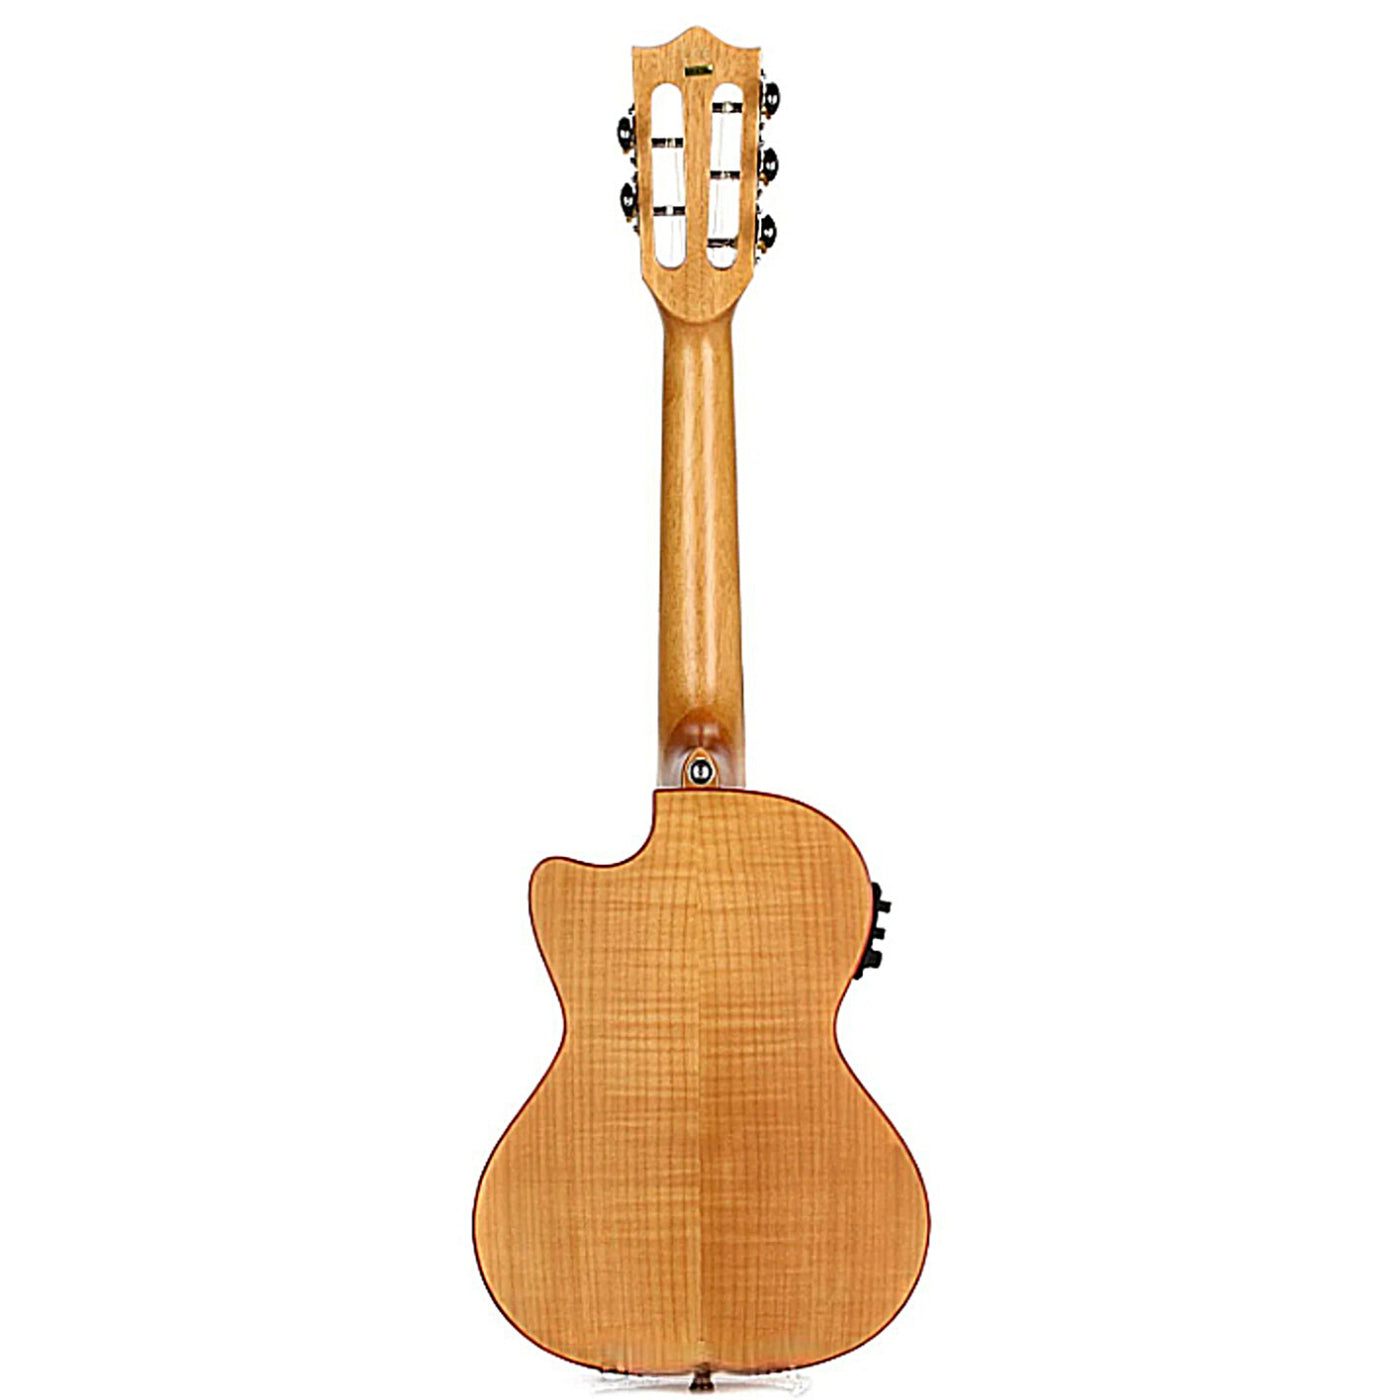 Lanikai FM-5CET 5 String Ukulele, Flame Maple Tenor Cutaway and Electronics, with Fishman Kula Preamp and Tuner